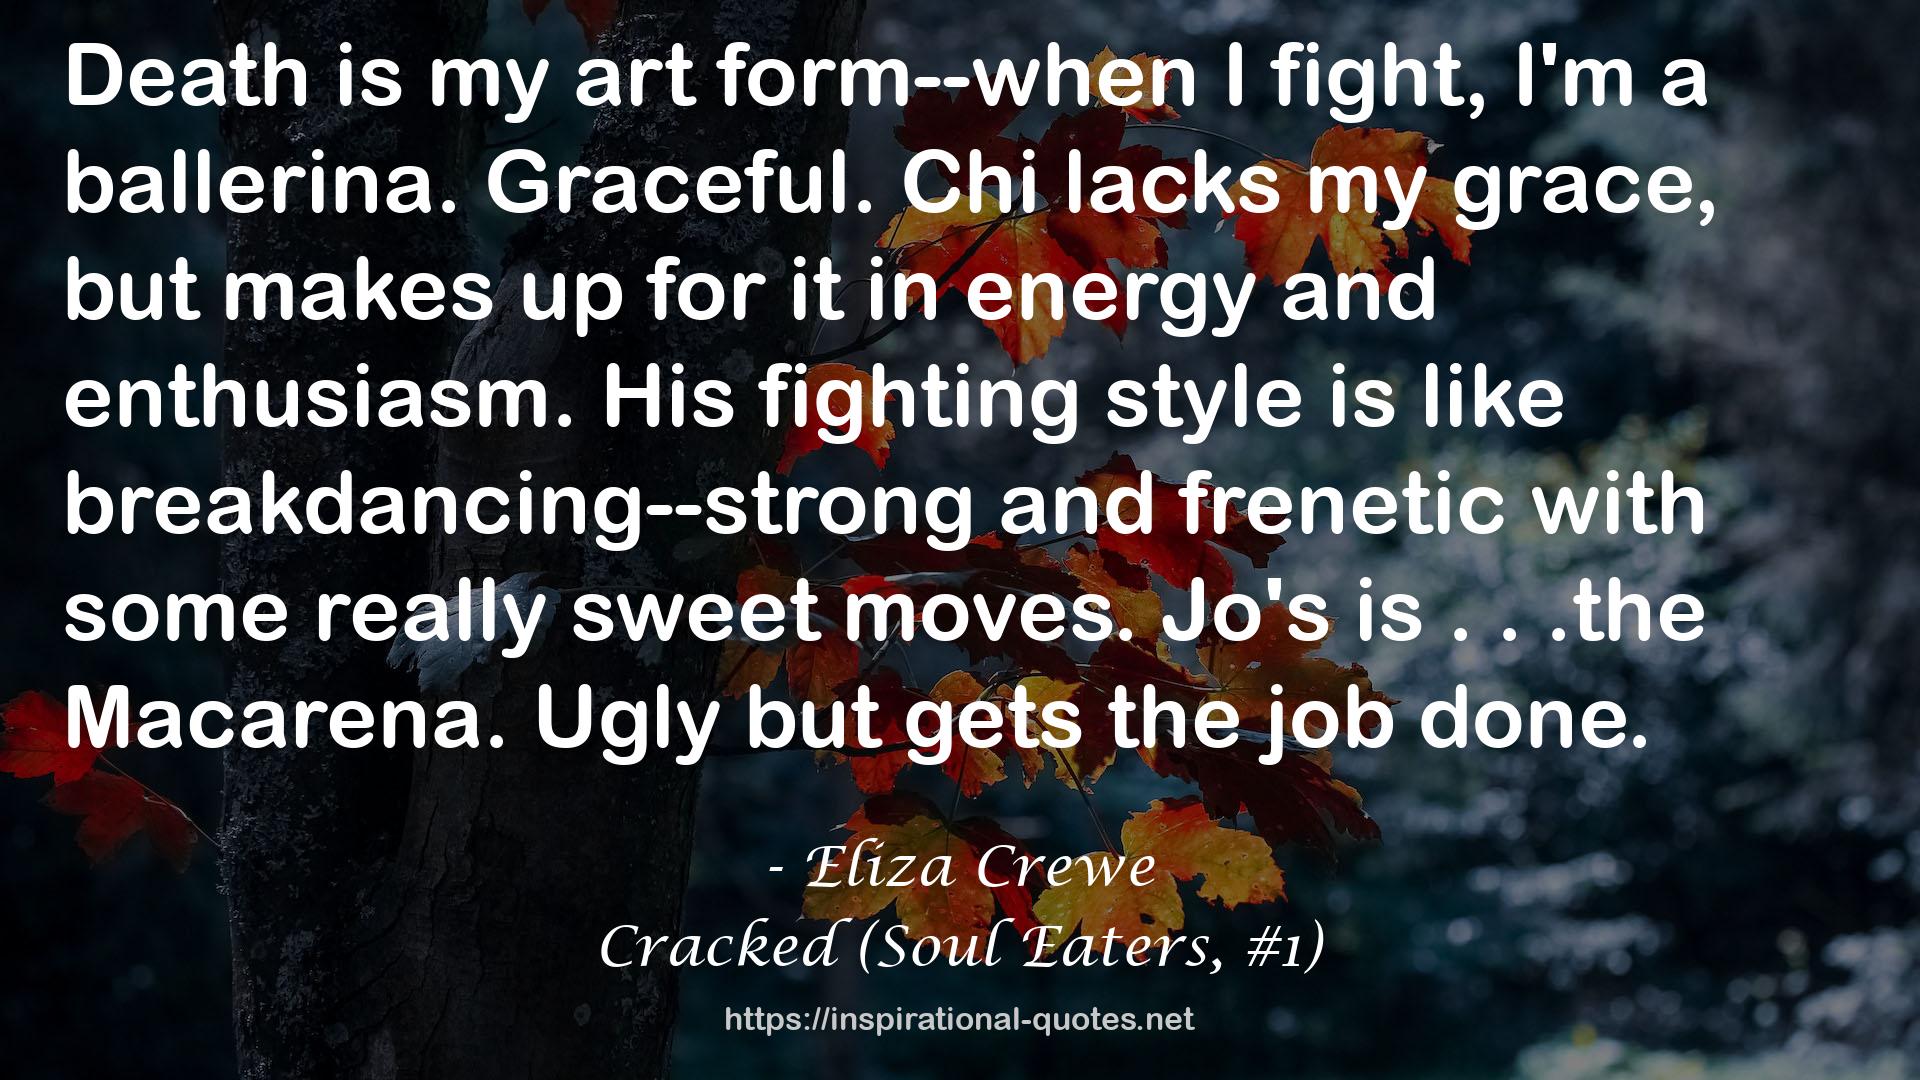 Cracked (Soul Eaters, #1) QUOTES